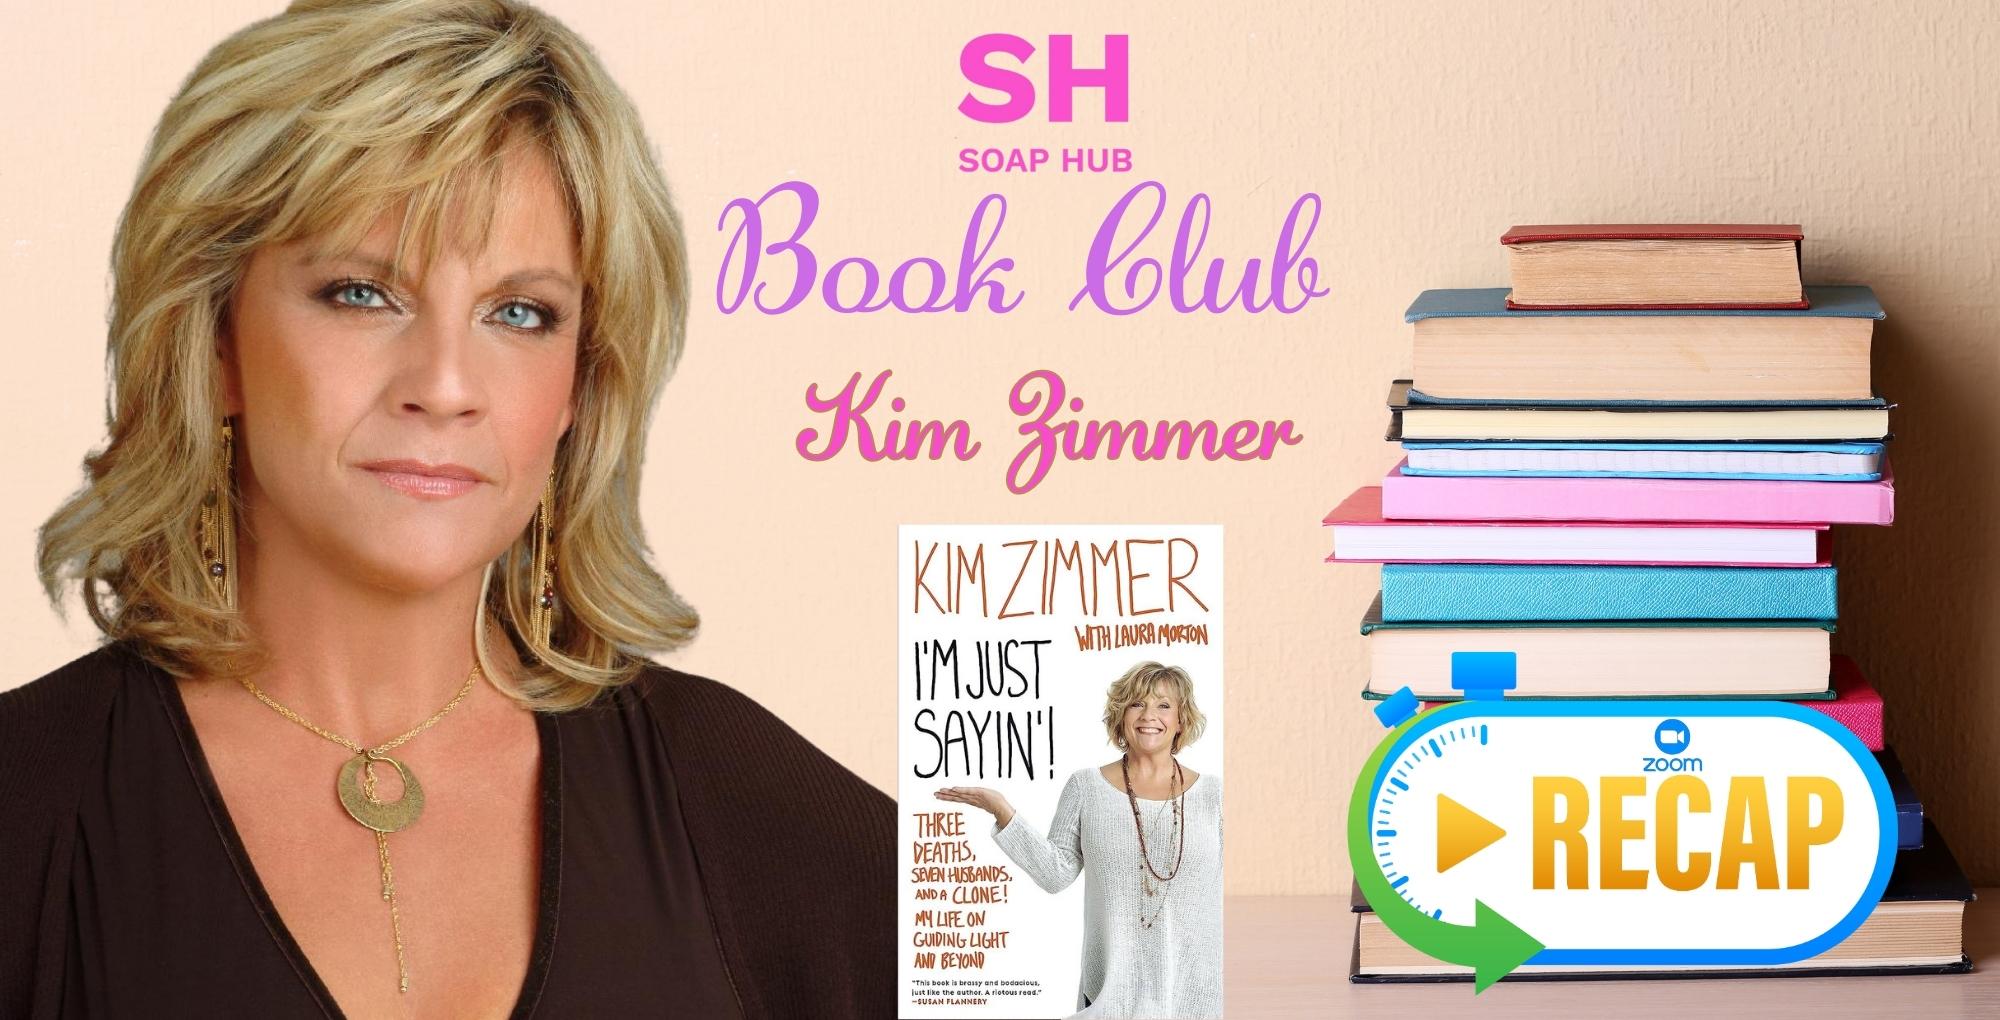 kim zimmer for july soap hub book club.